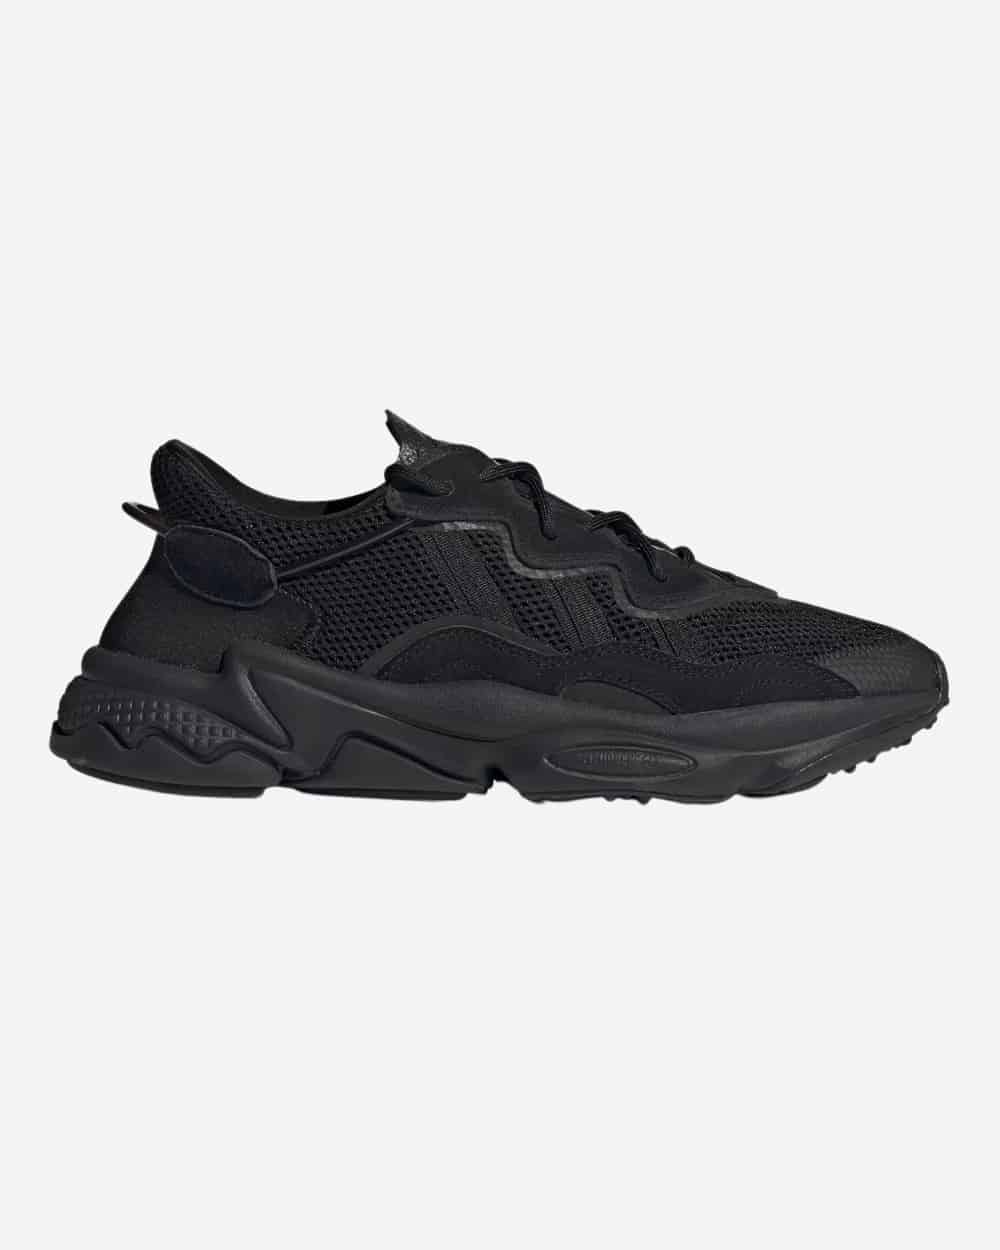 Adidas Ozweego sneakers in all black